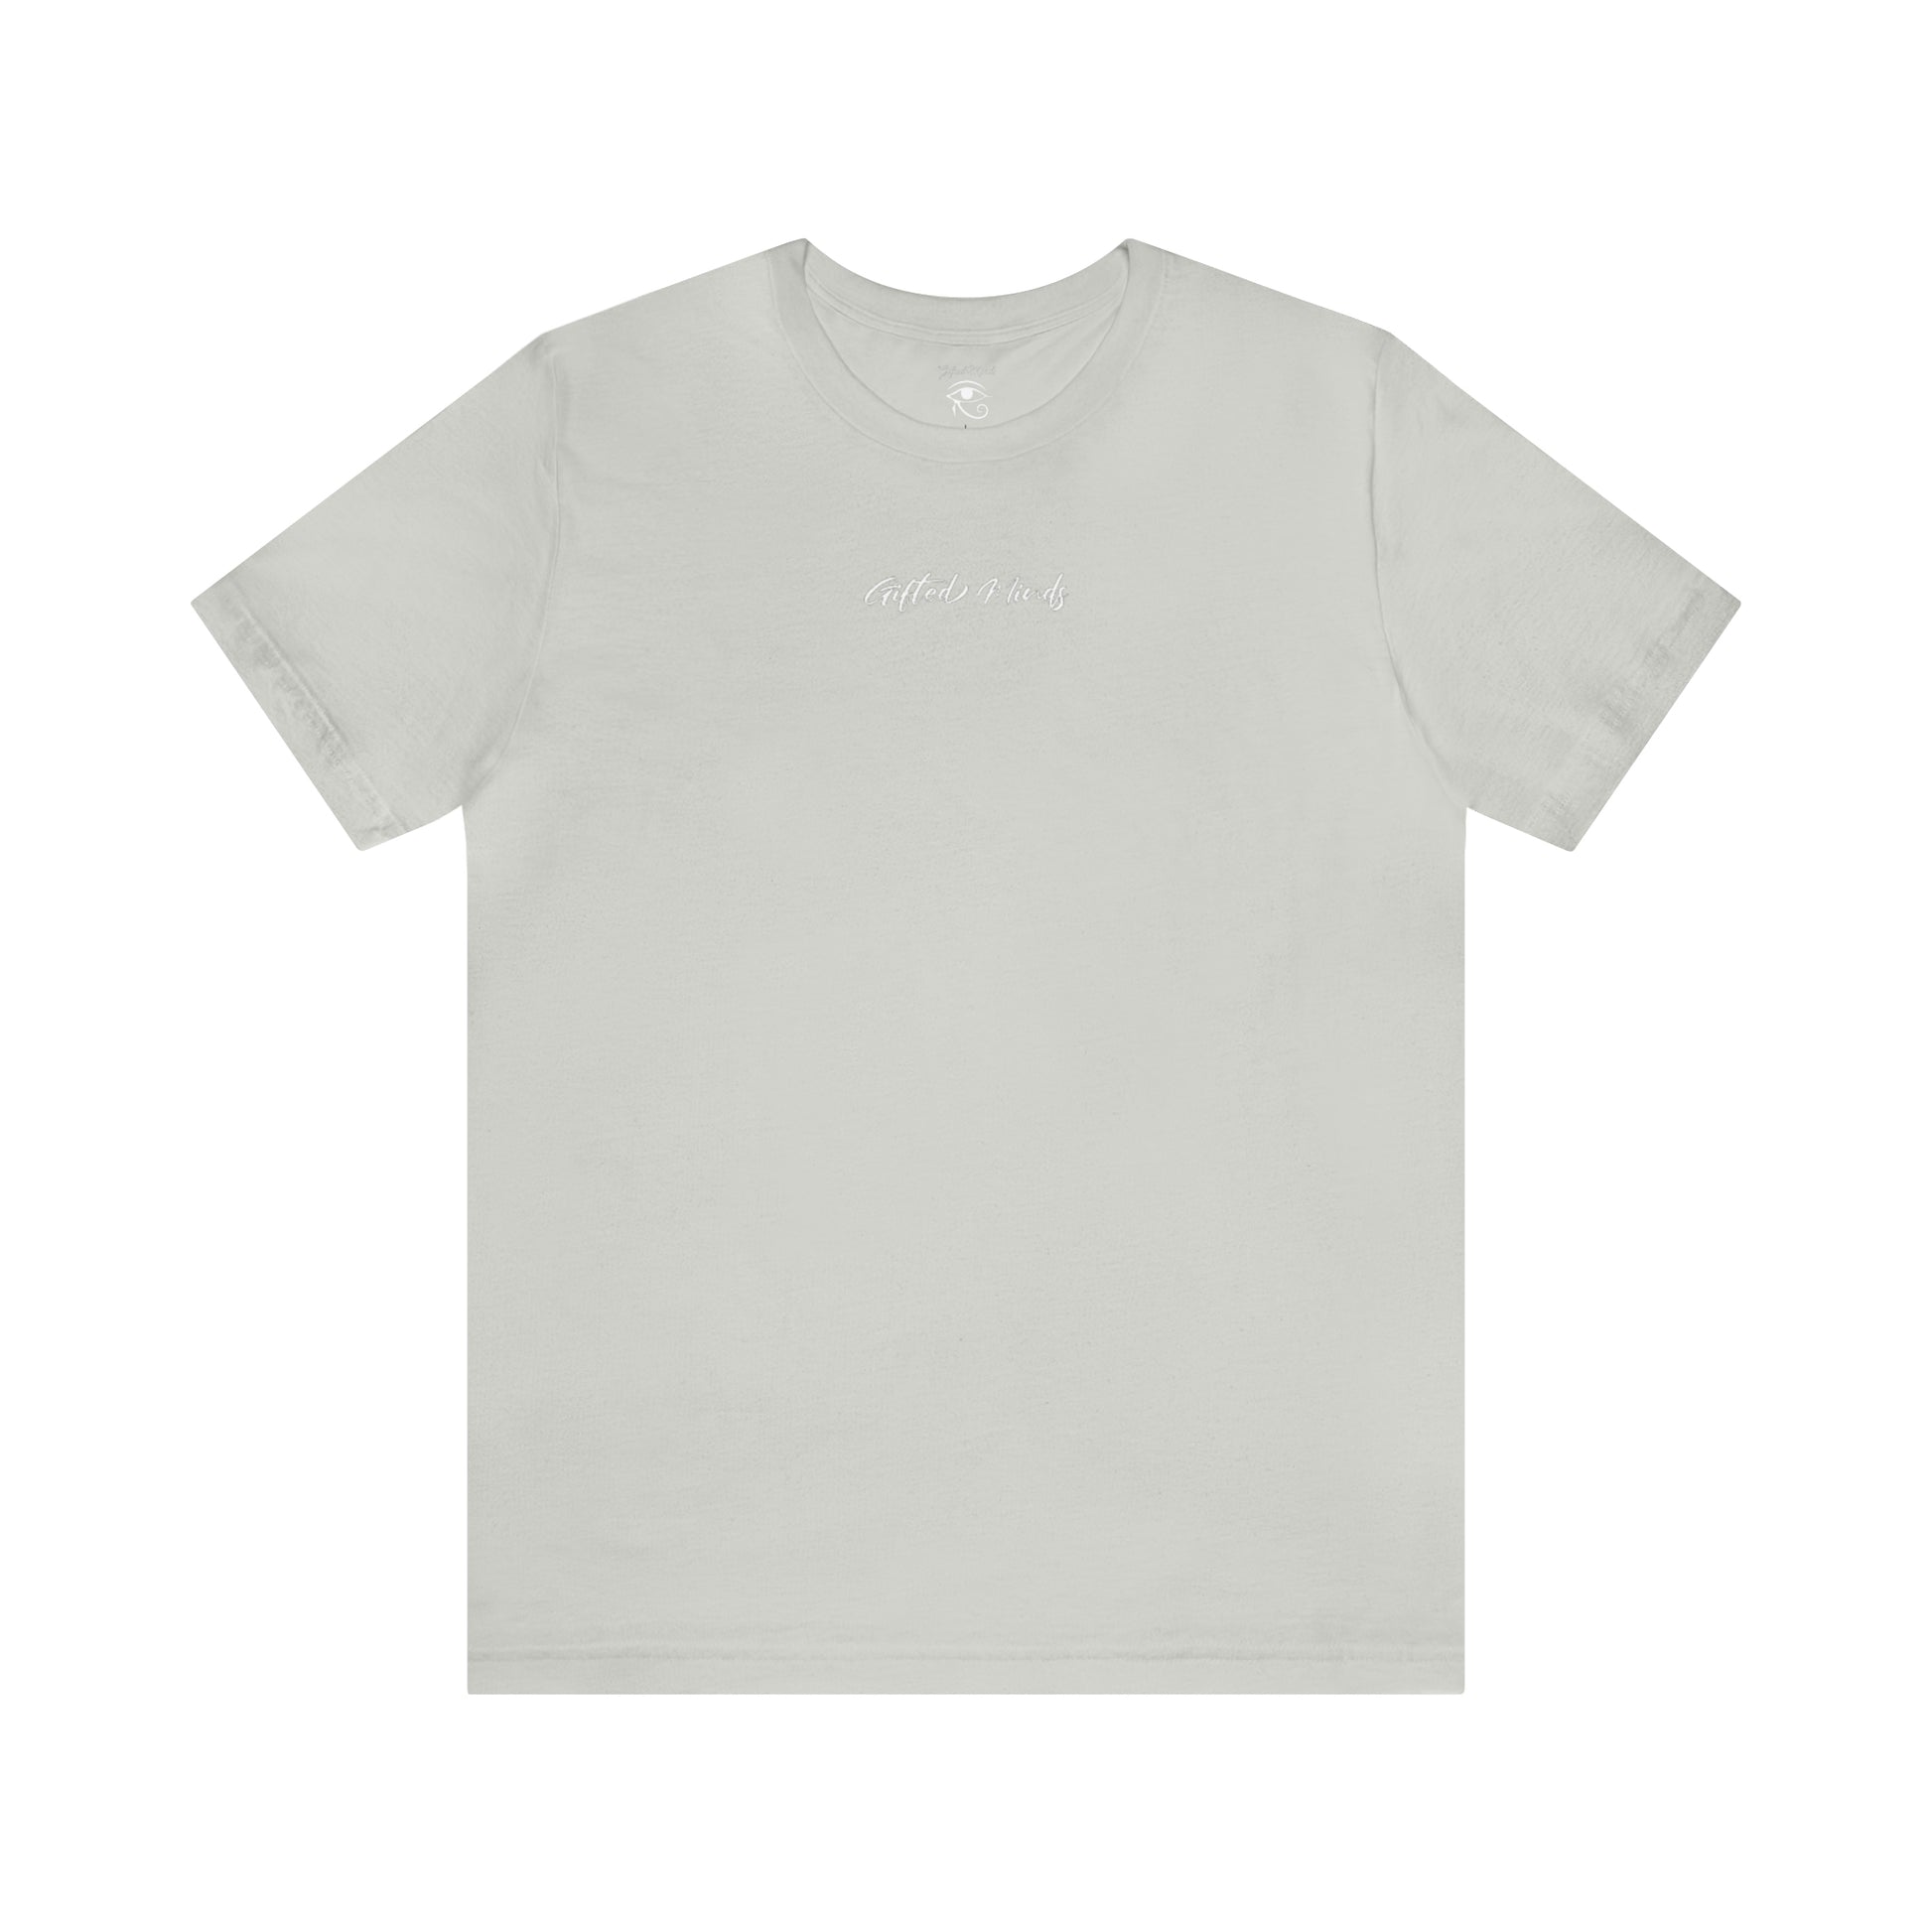 Gifted Minds Short Sleeve Tee - GFTD MNDS